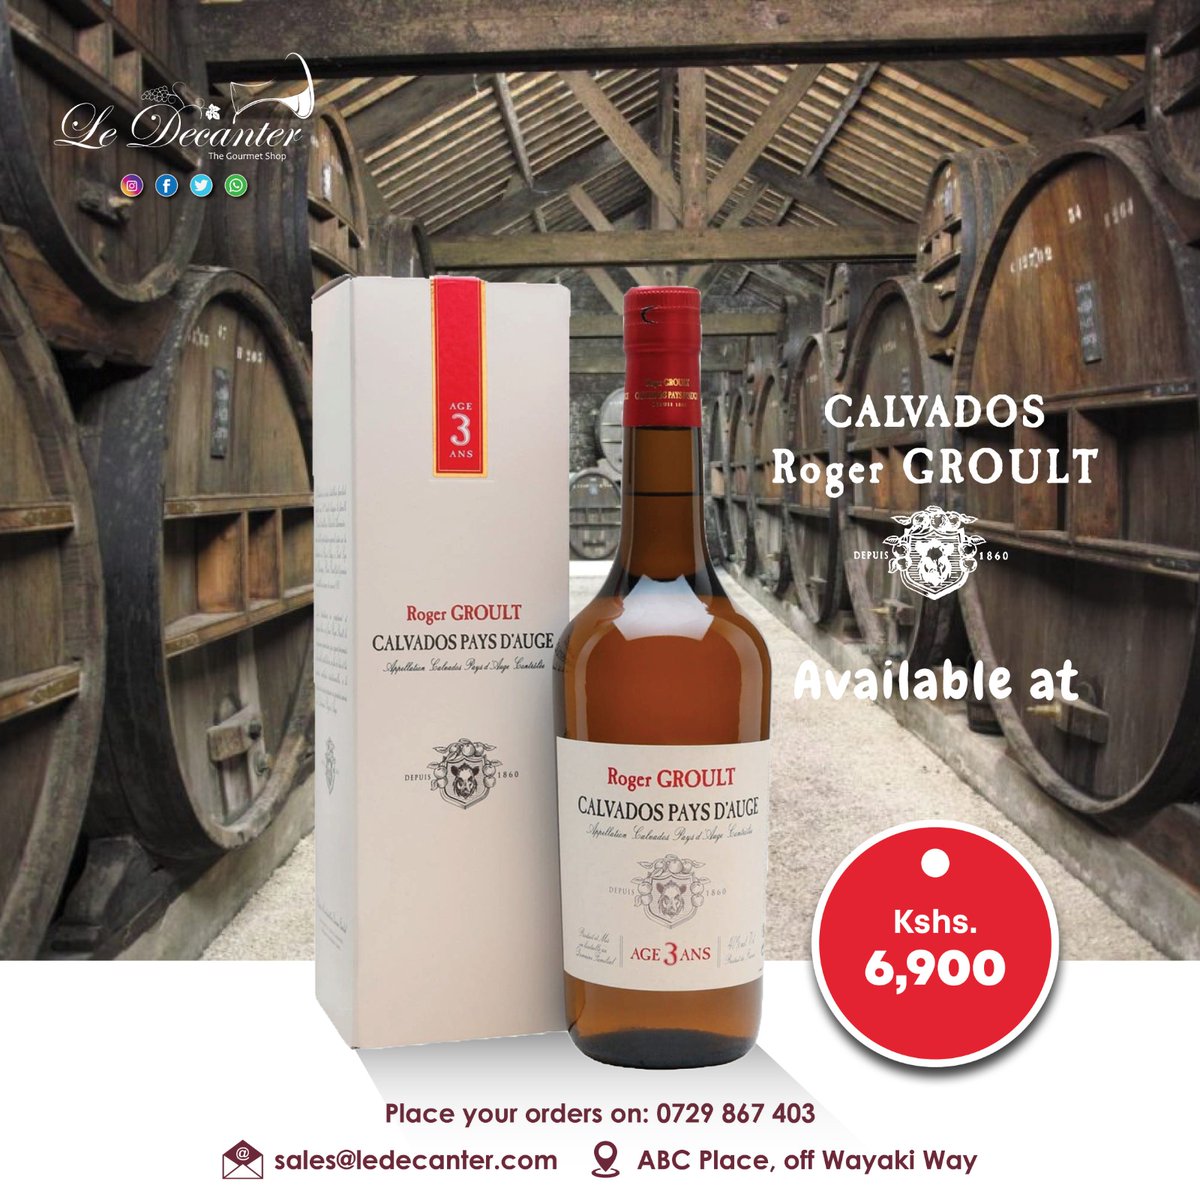 Calvados is an apple brandy distilled from cider made from apples and pears grown in the orchards of north-western France. Available at our shop for only 6,900/= To order kindly call us on 0729867403 Email: sales@ledecanter.com #ledecanter #ledecanterspirits